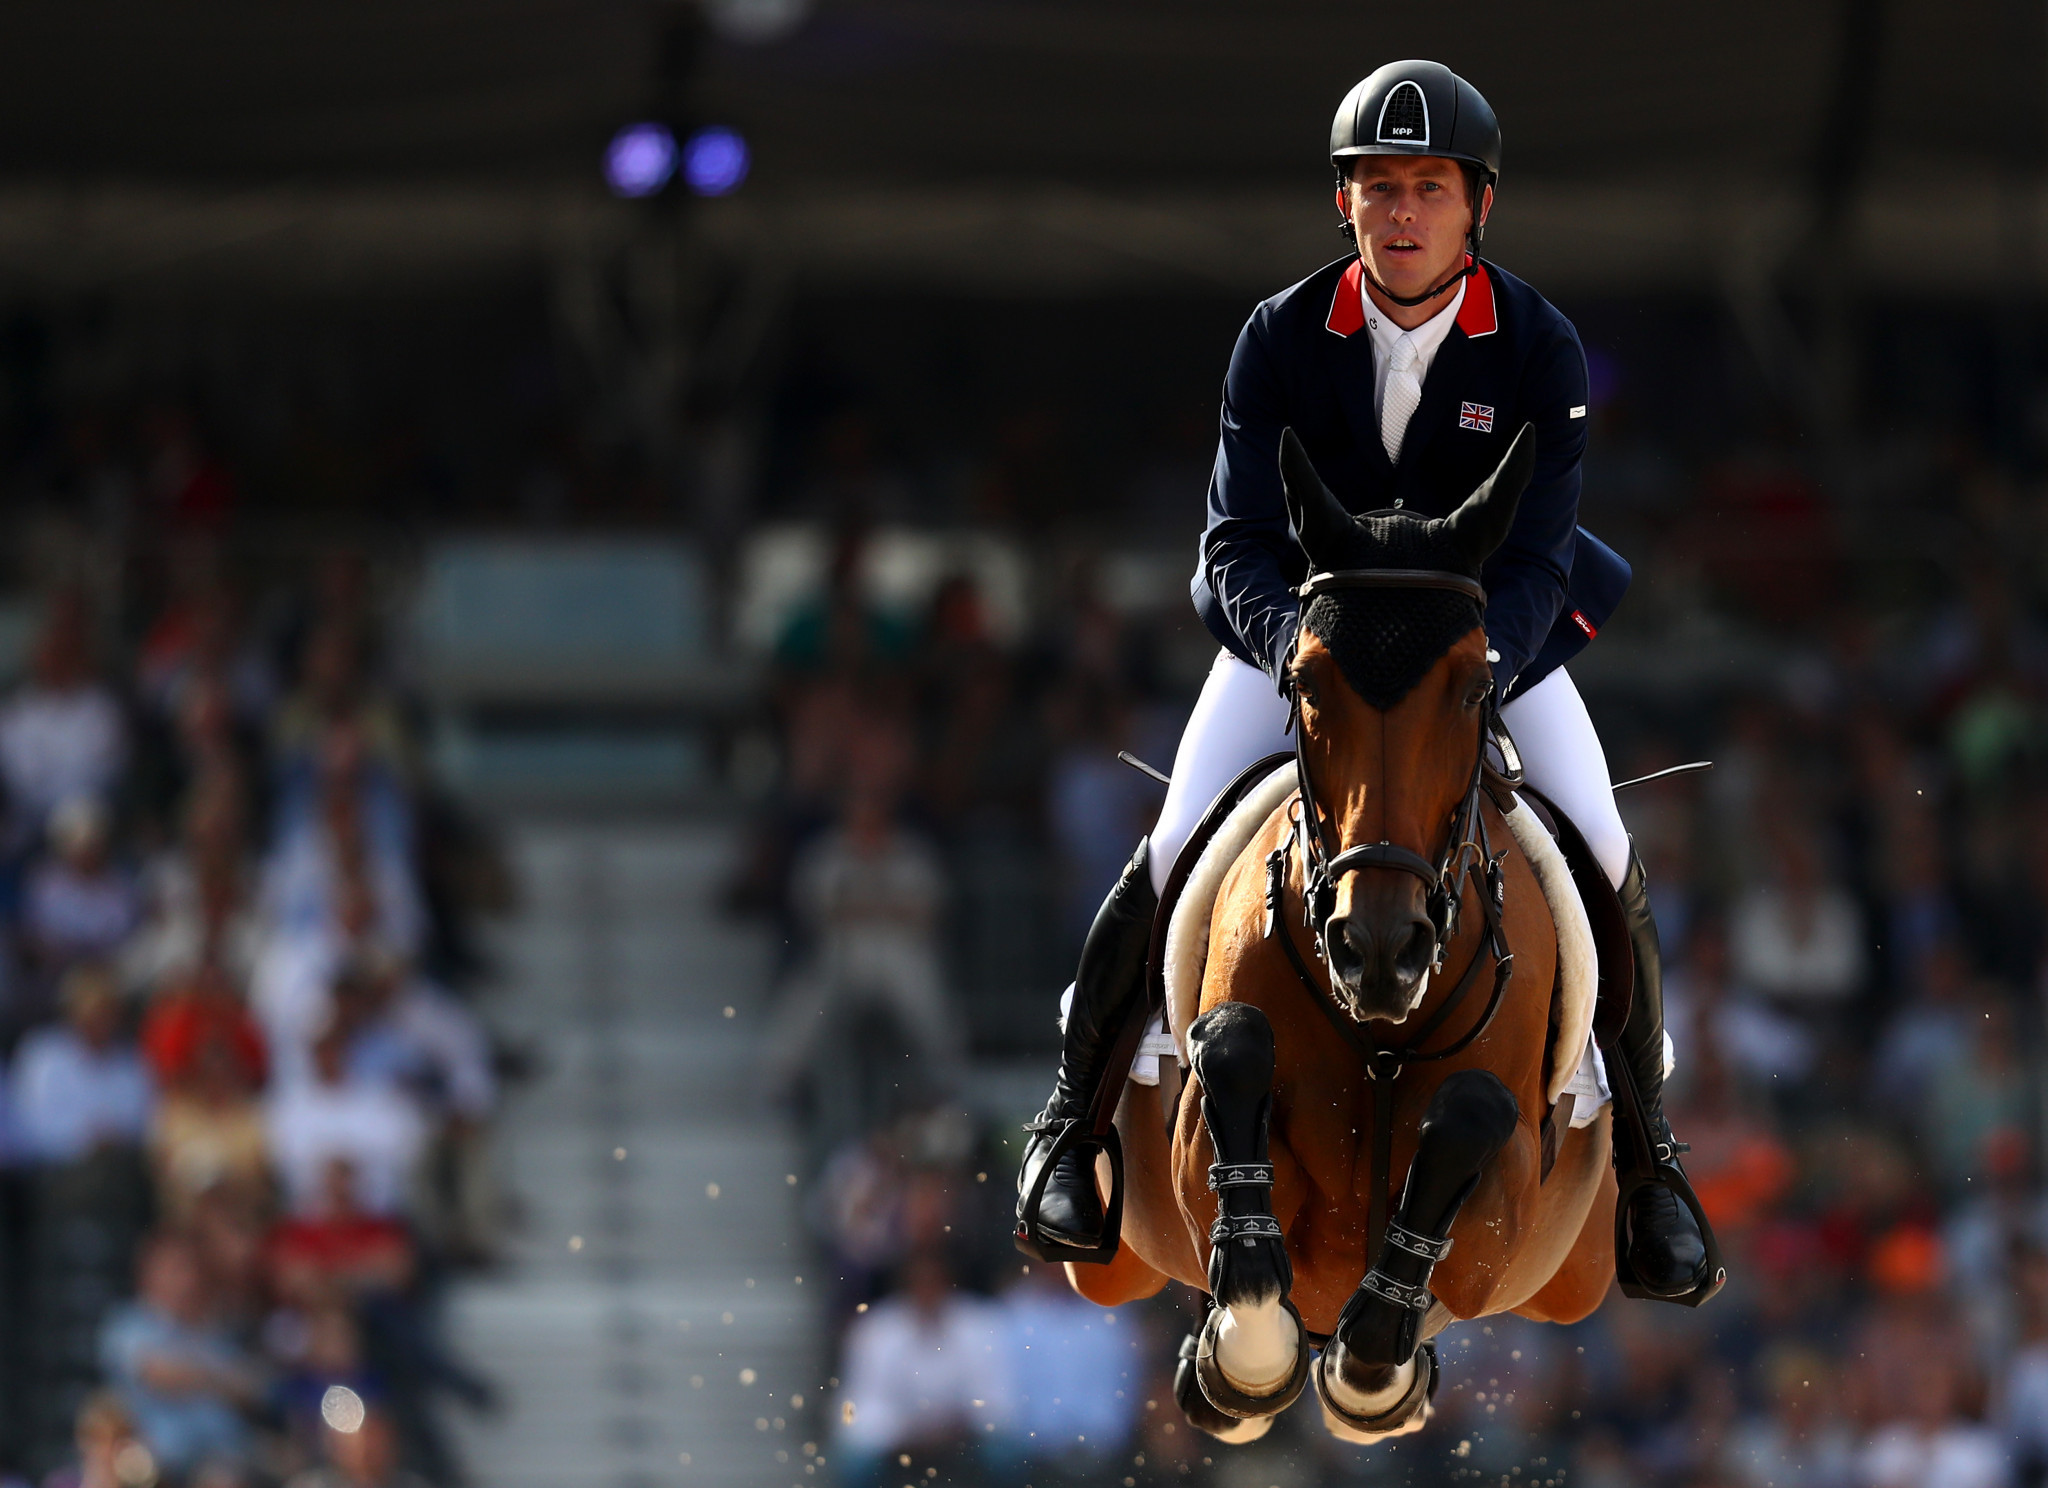 Brash makes strong start at Global Champions Tour event in Stockholm